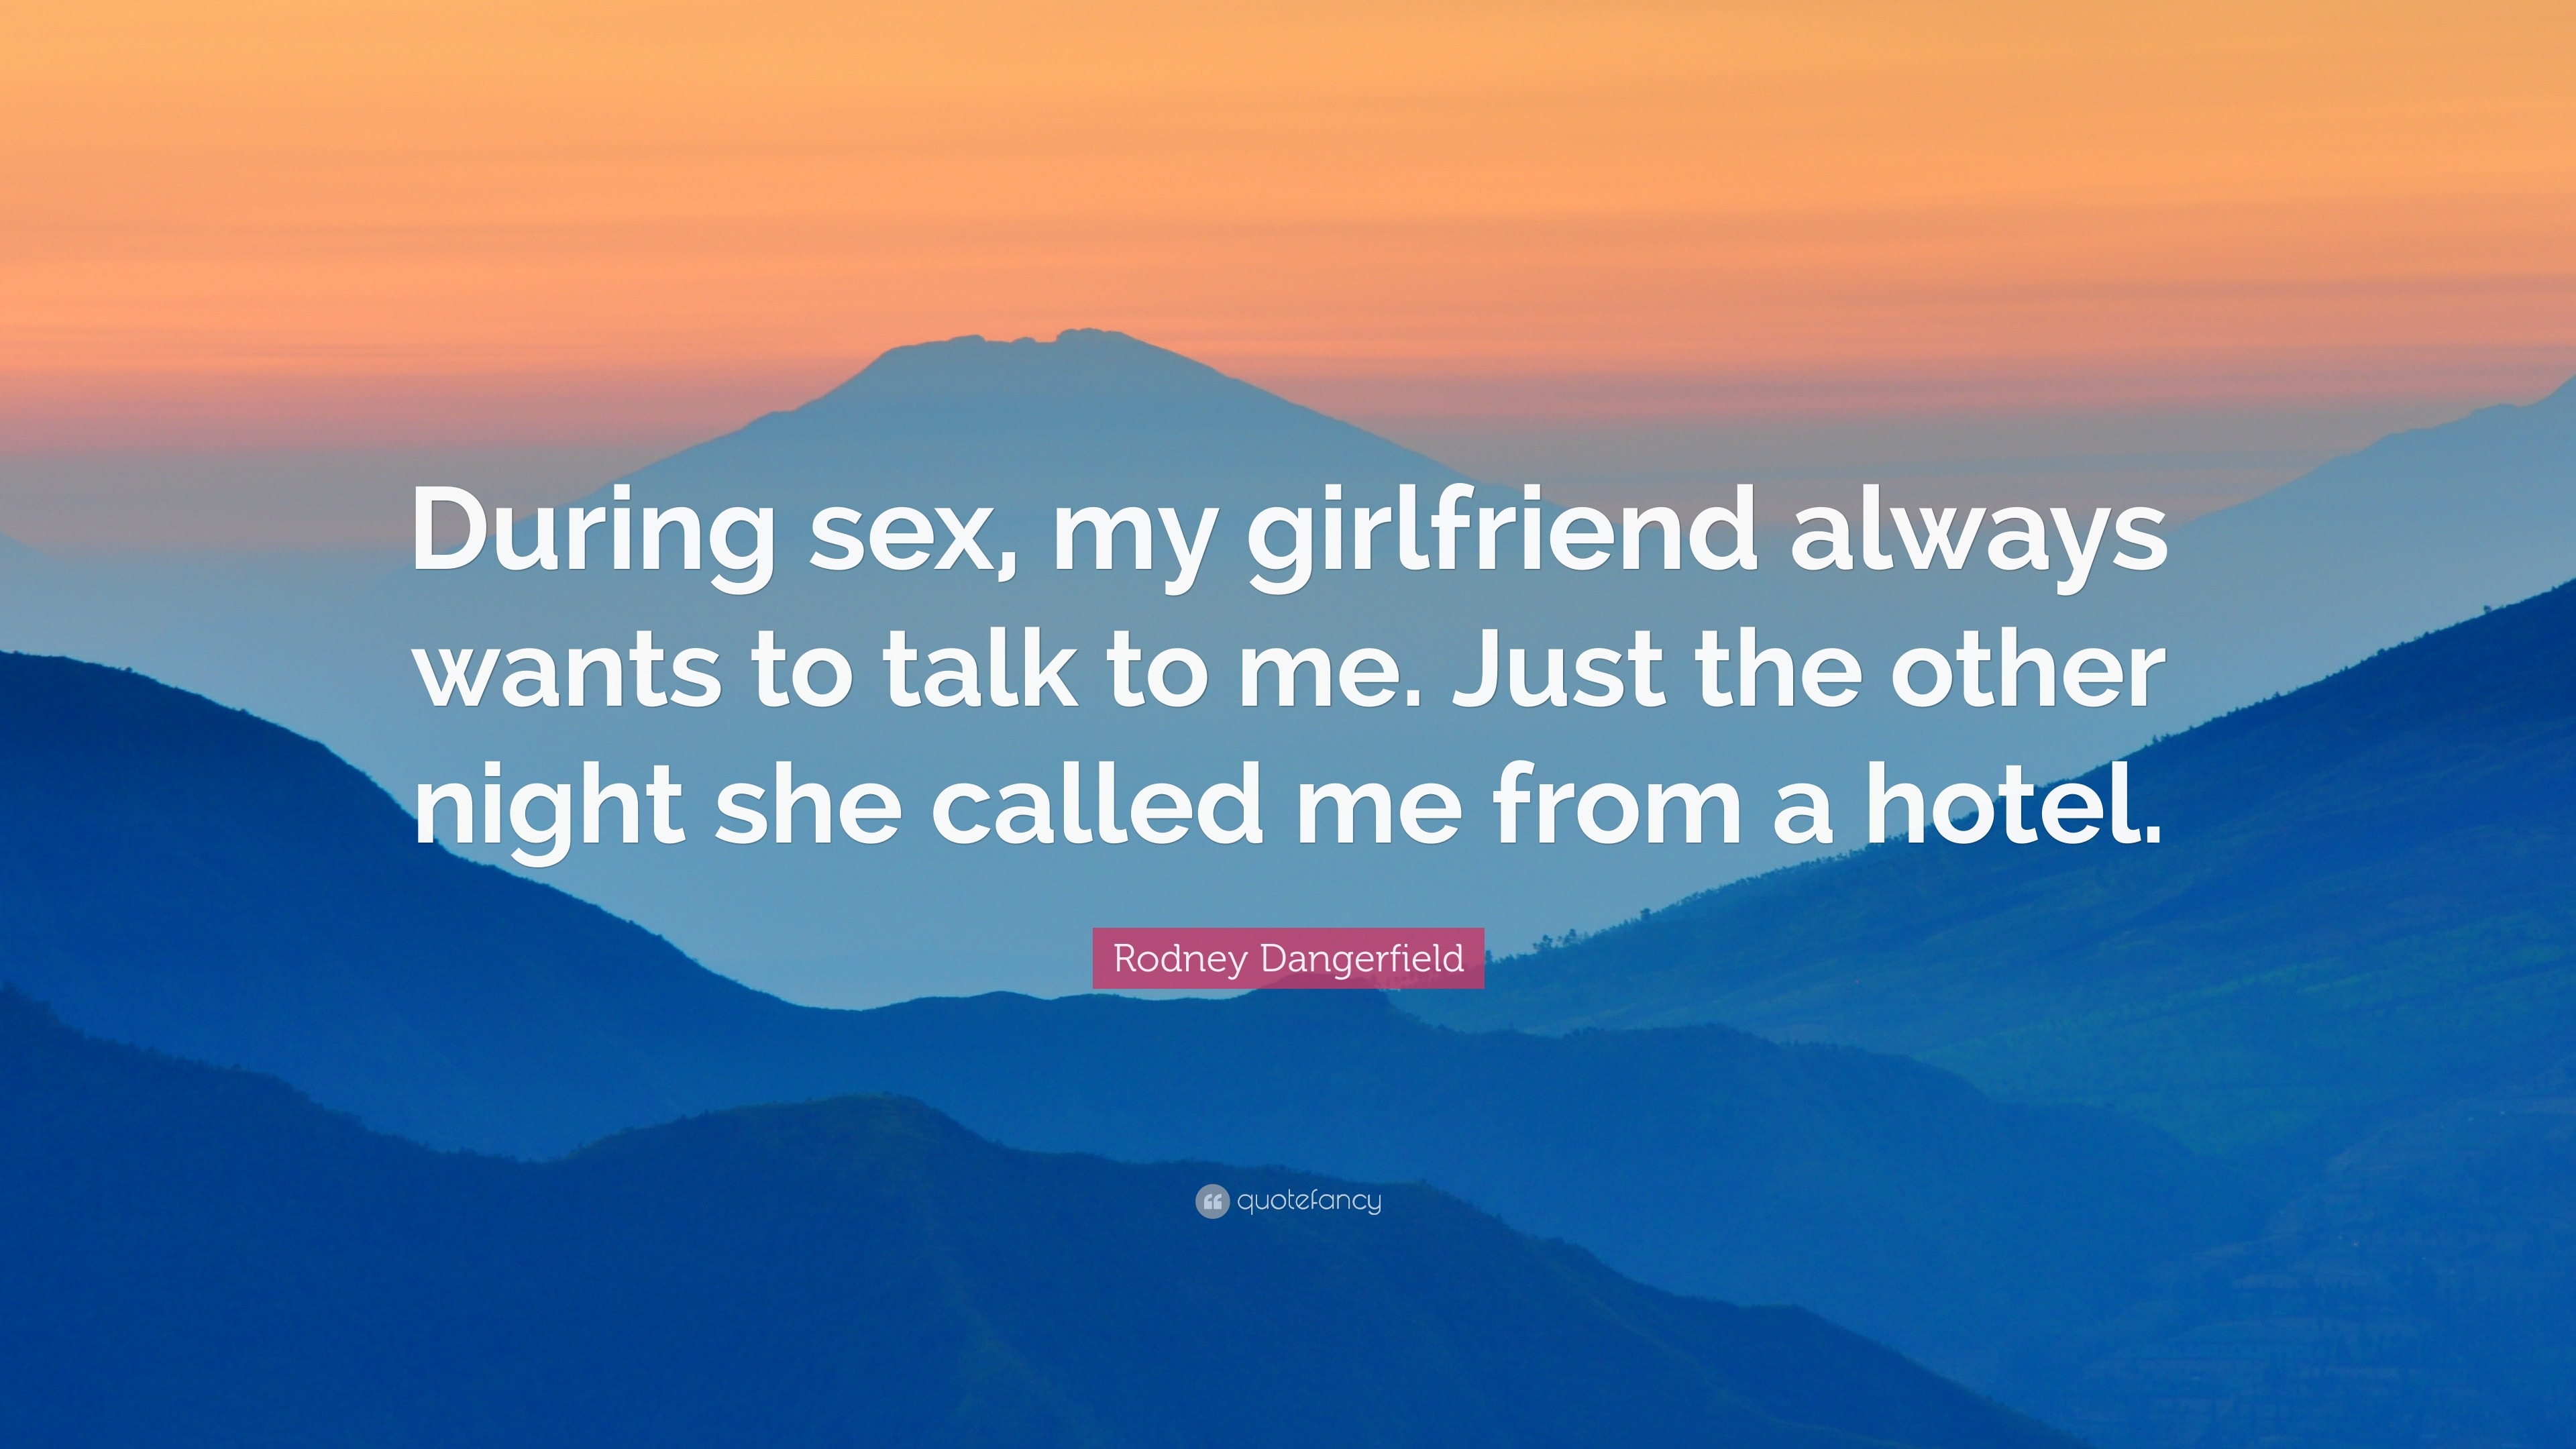 Rodney Dangerfield Quote “During sex, my girlfriend always wants to talk to me pic